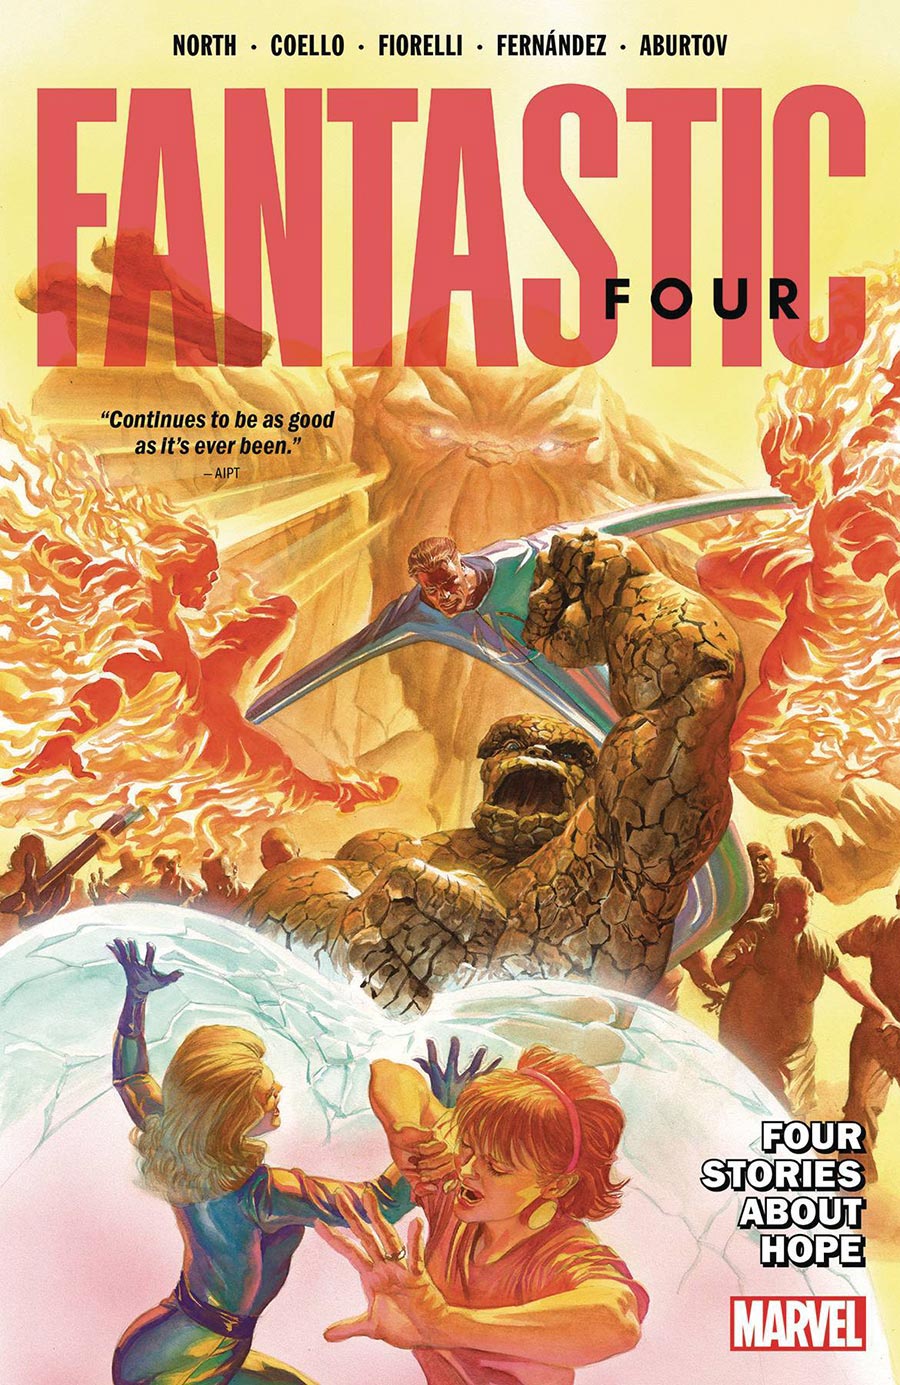 Fantastic Four By Ryan North Vol 2 Four Stories About Hope TP